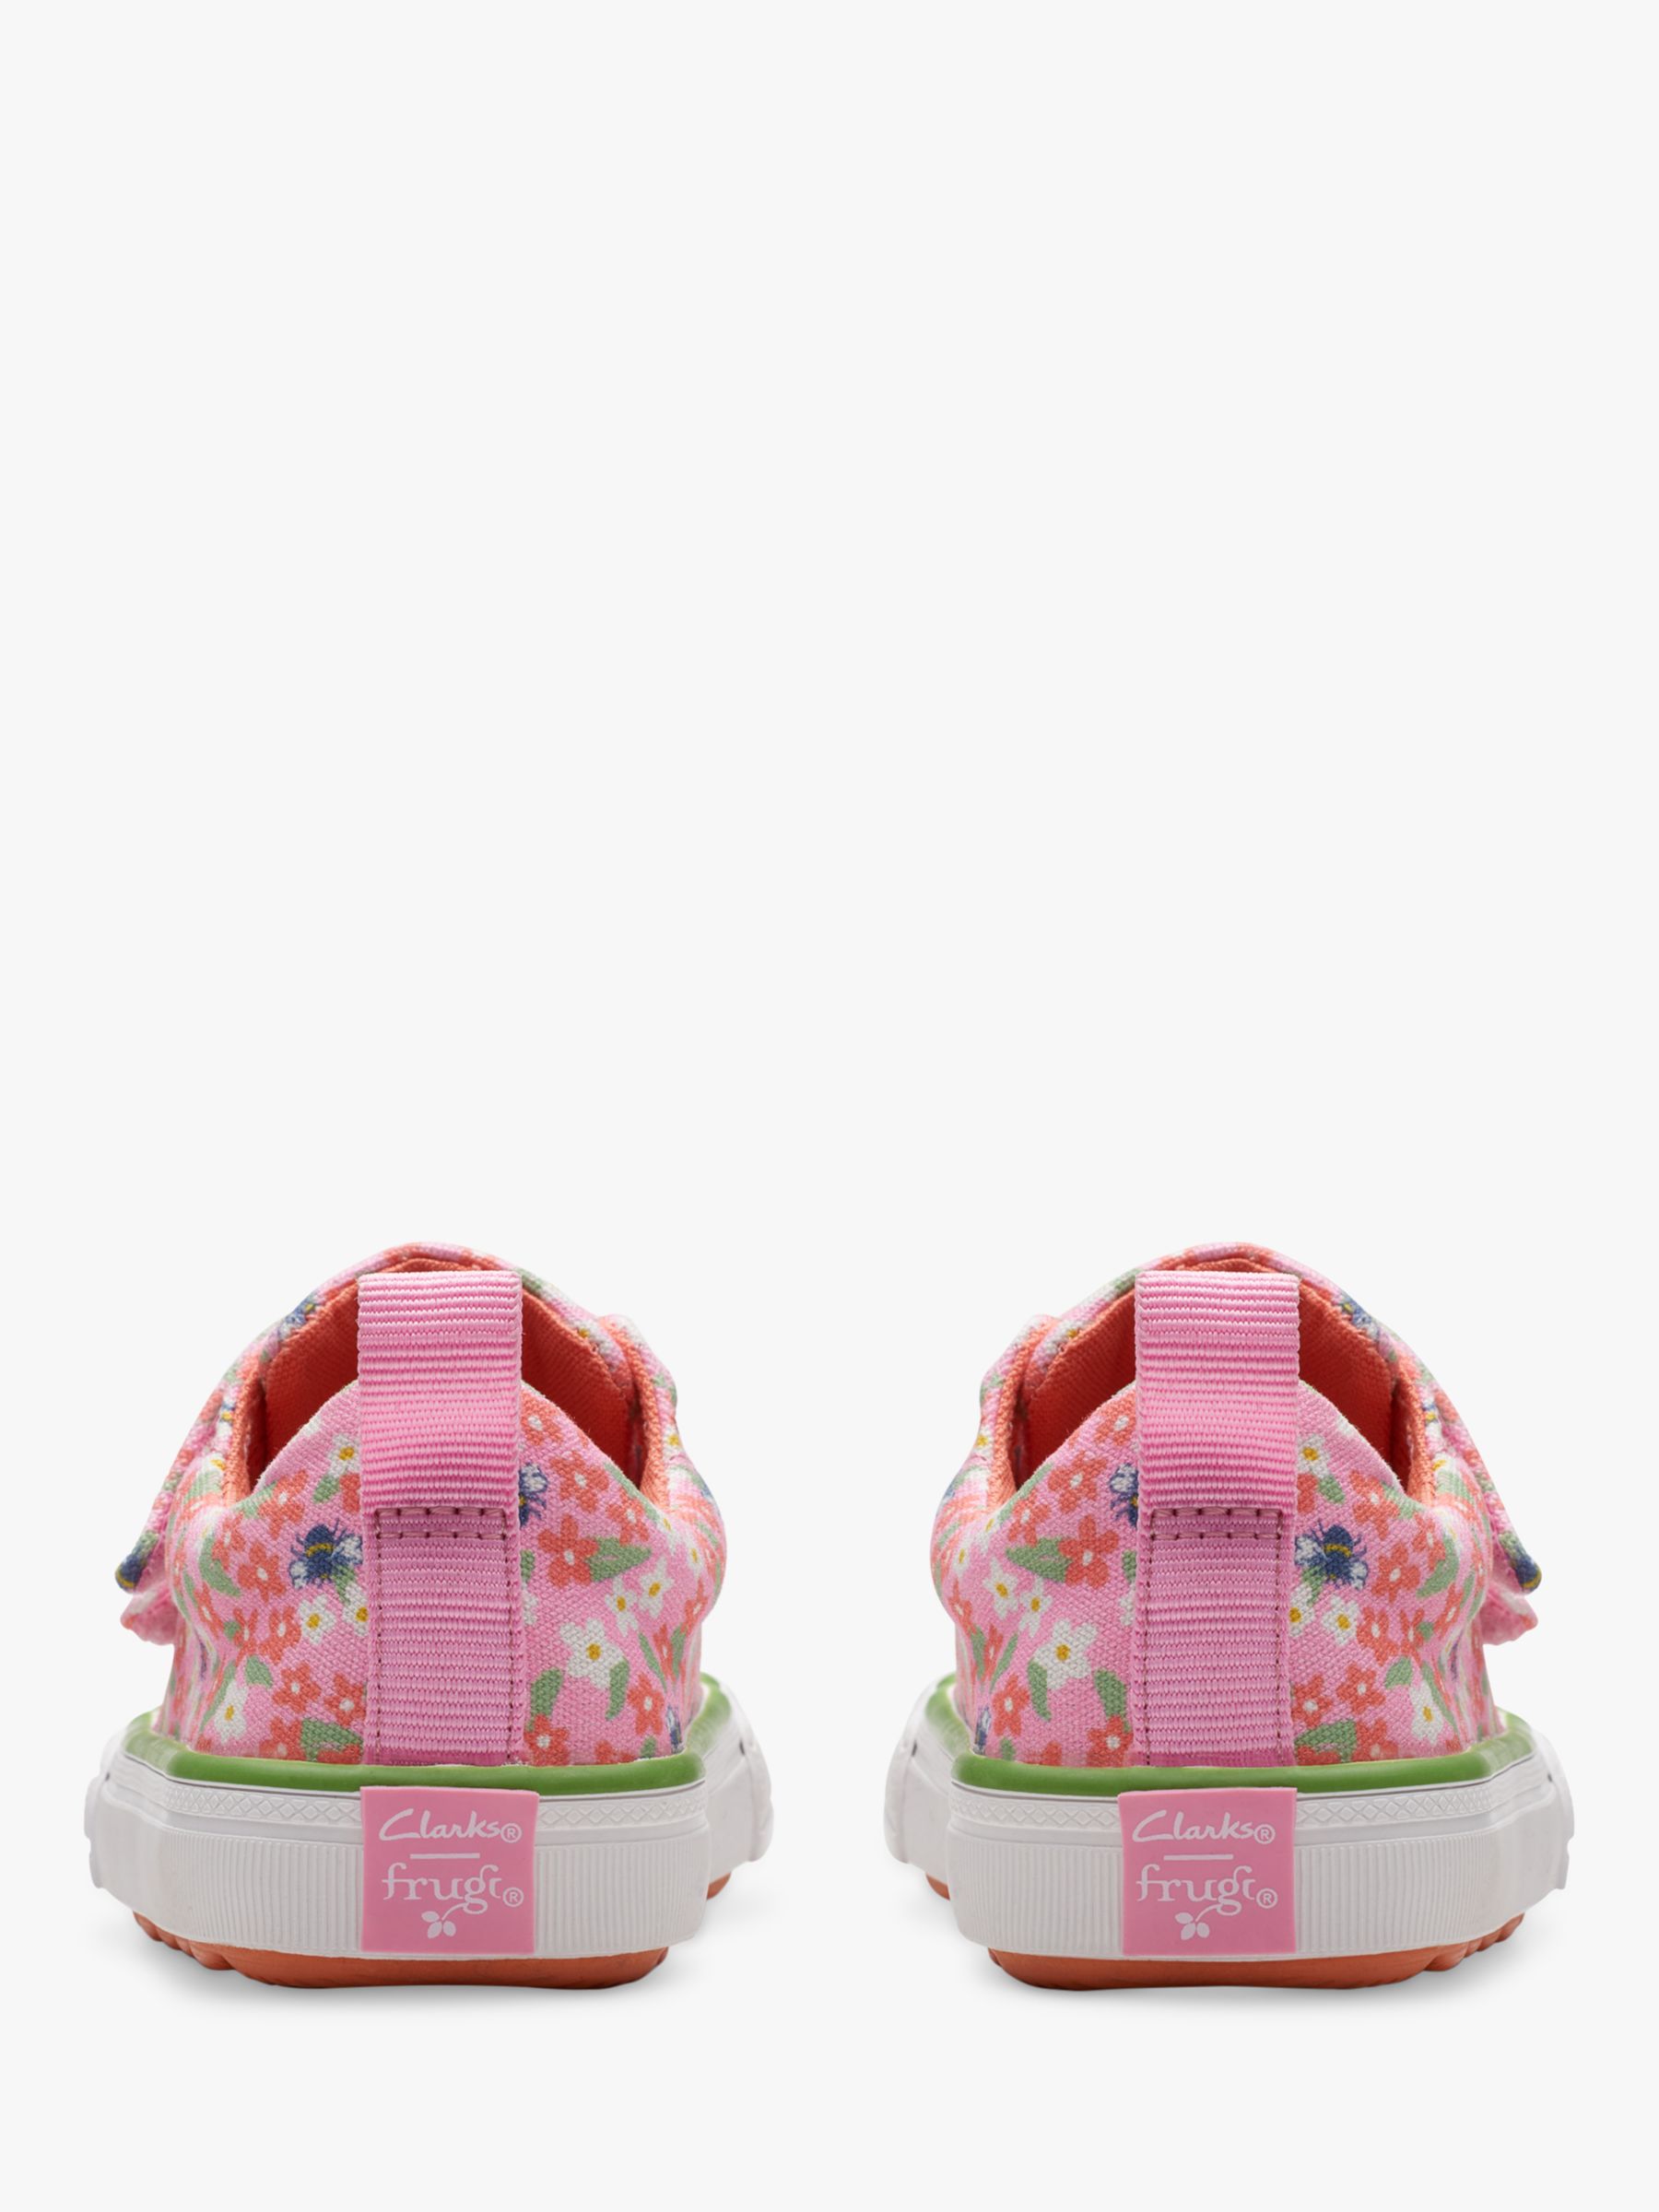 Clarks Kids' Foxing Posey Canvas Shoes, Pink/Multi, 4G Jnr